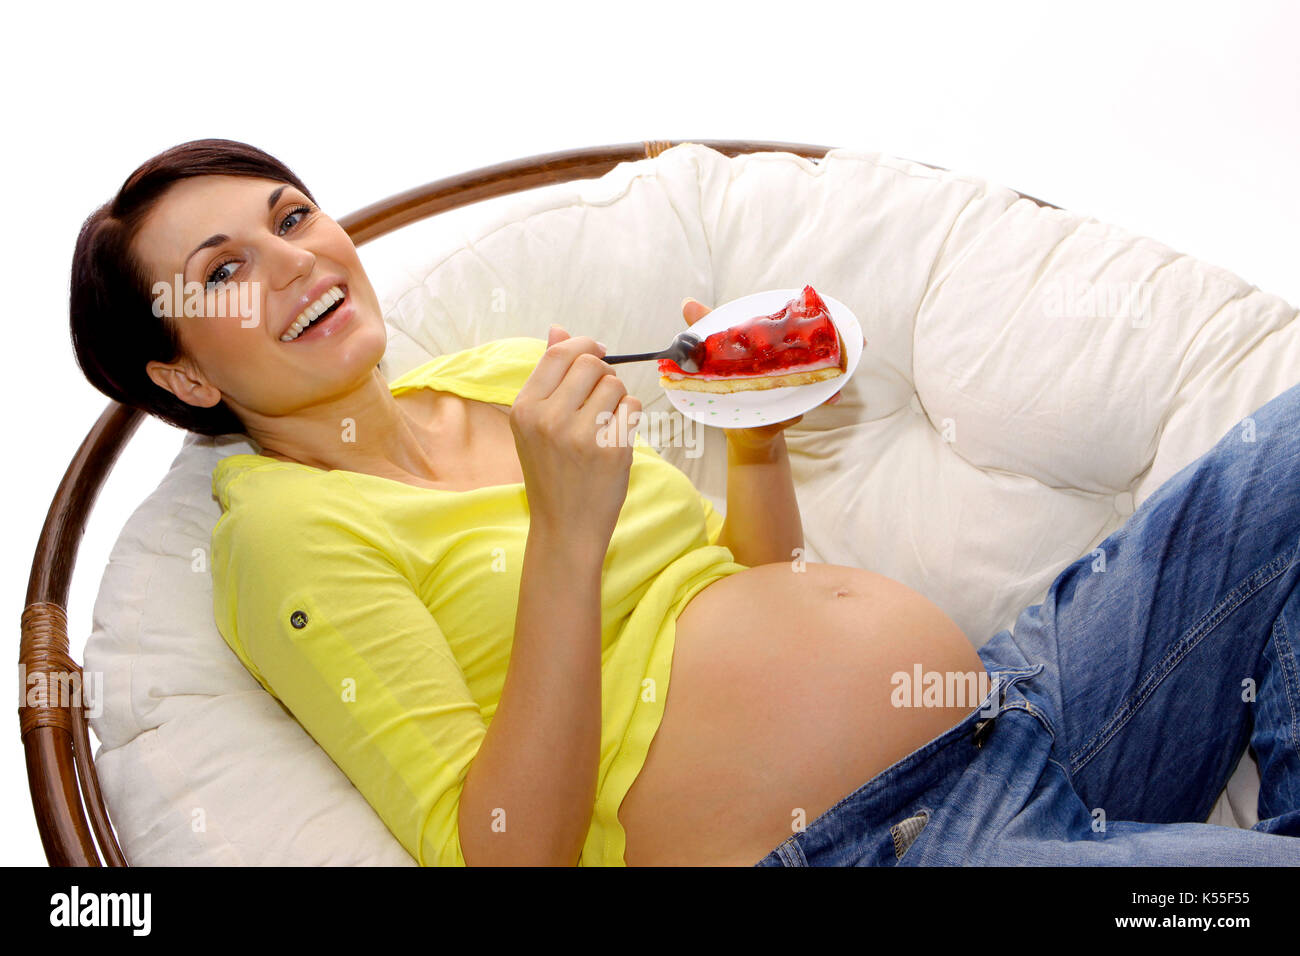 Pregnant woman eating a piece of sweet cake Stock Photo